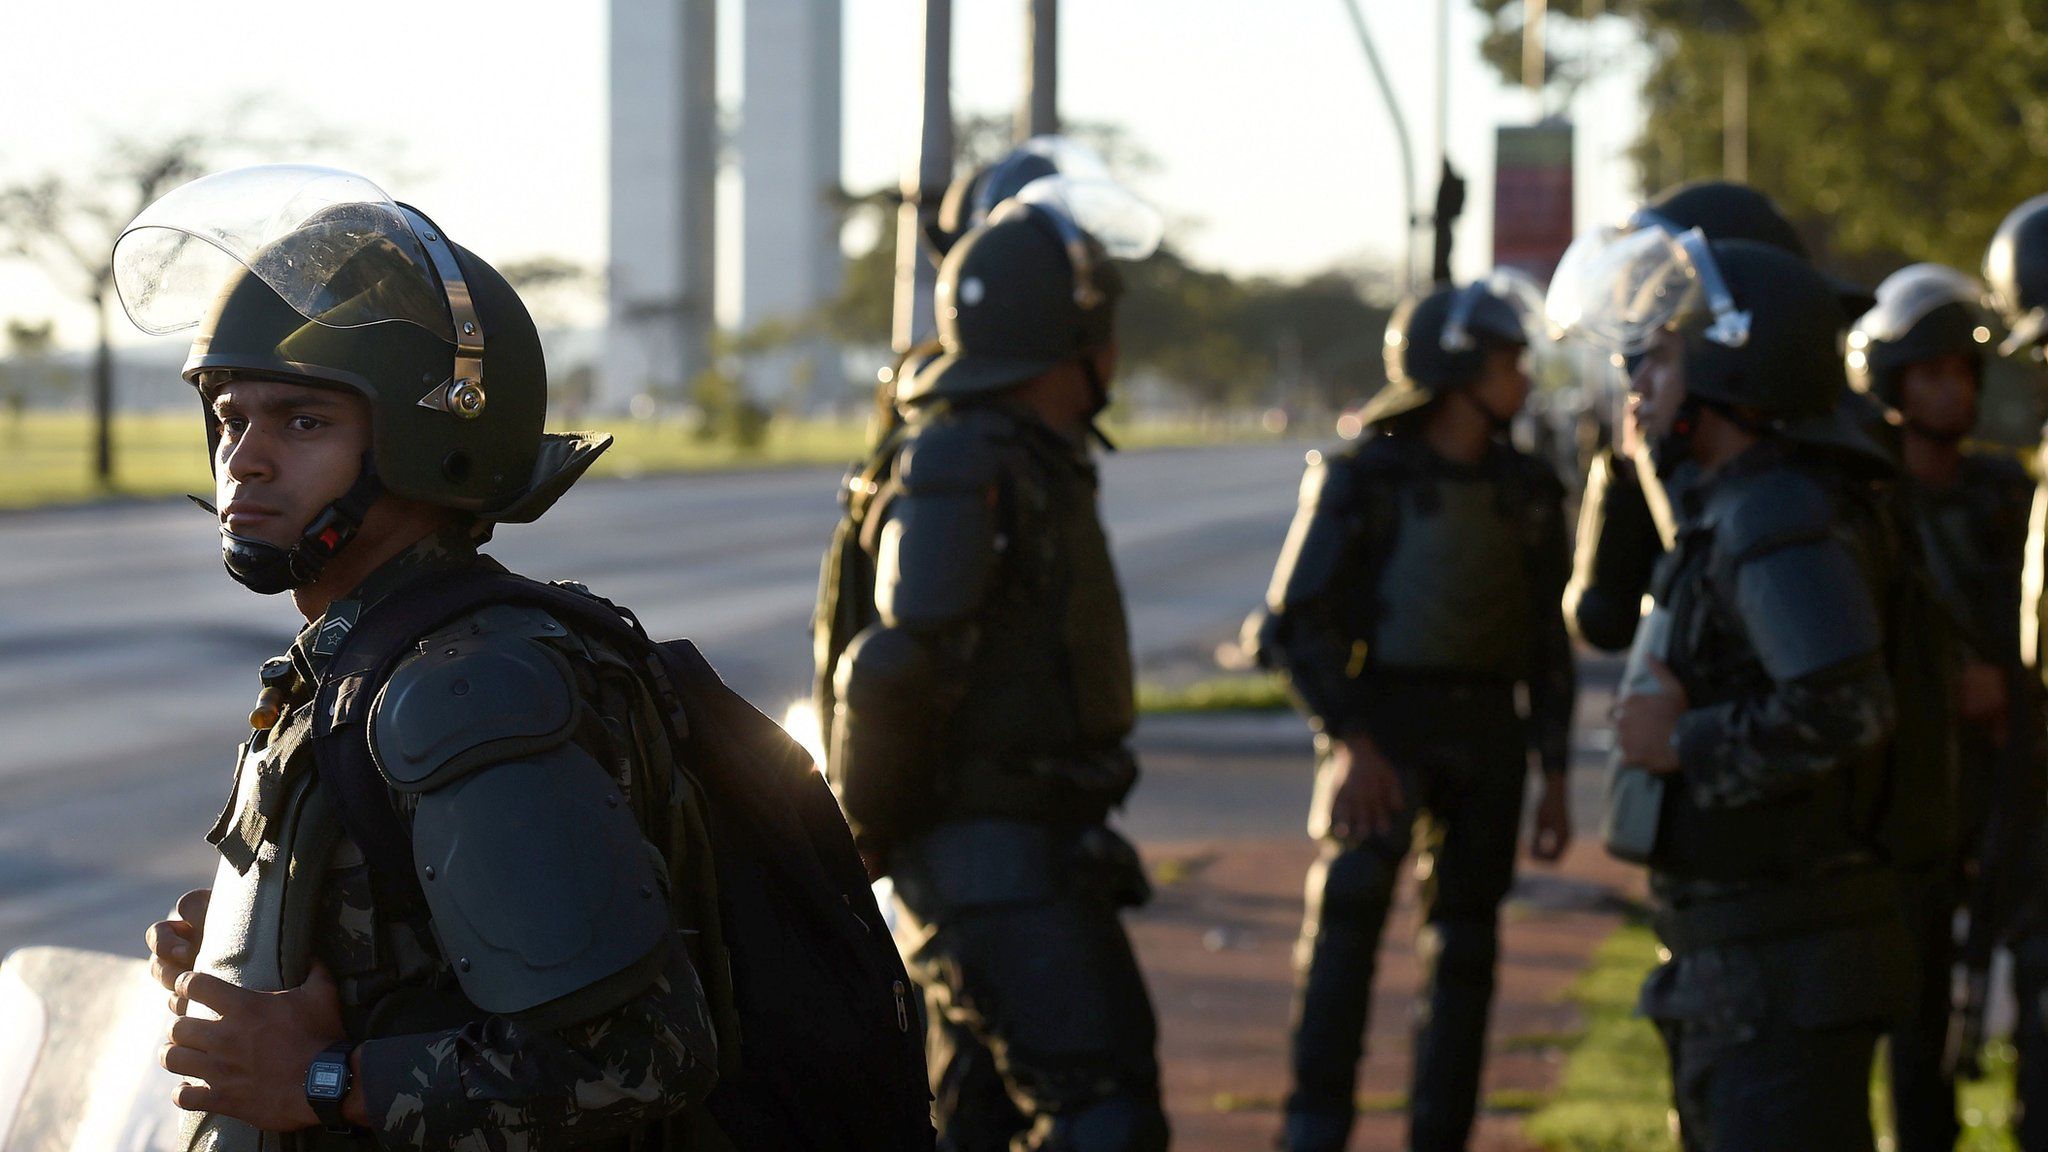 Brazilian Army military police in riot gear guard public buildings in Brasilia, on May 25, 2017